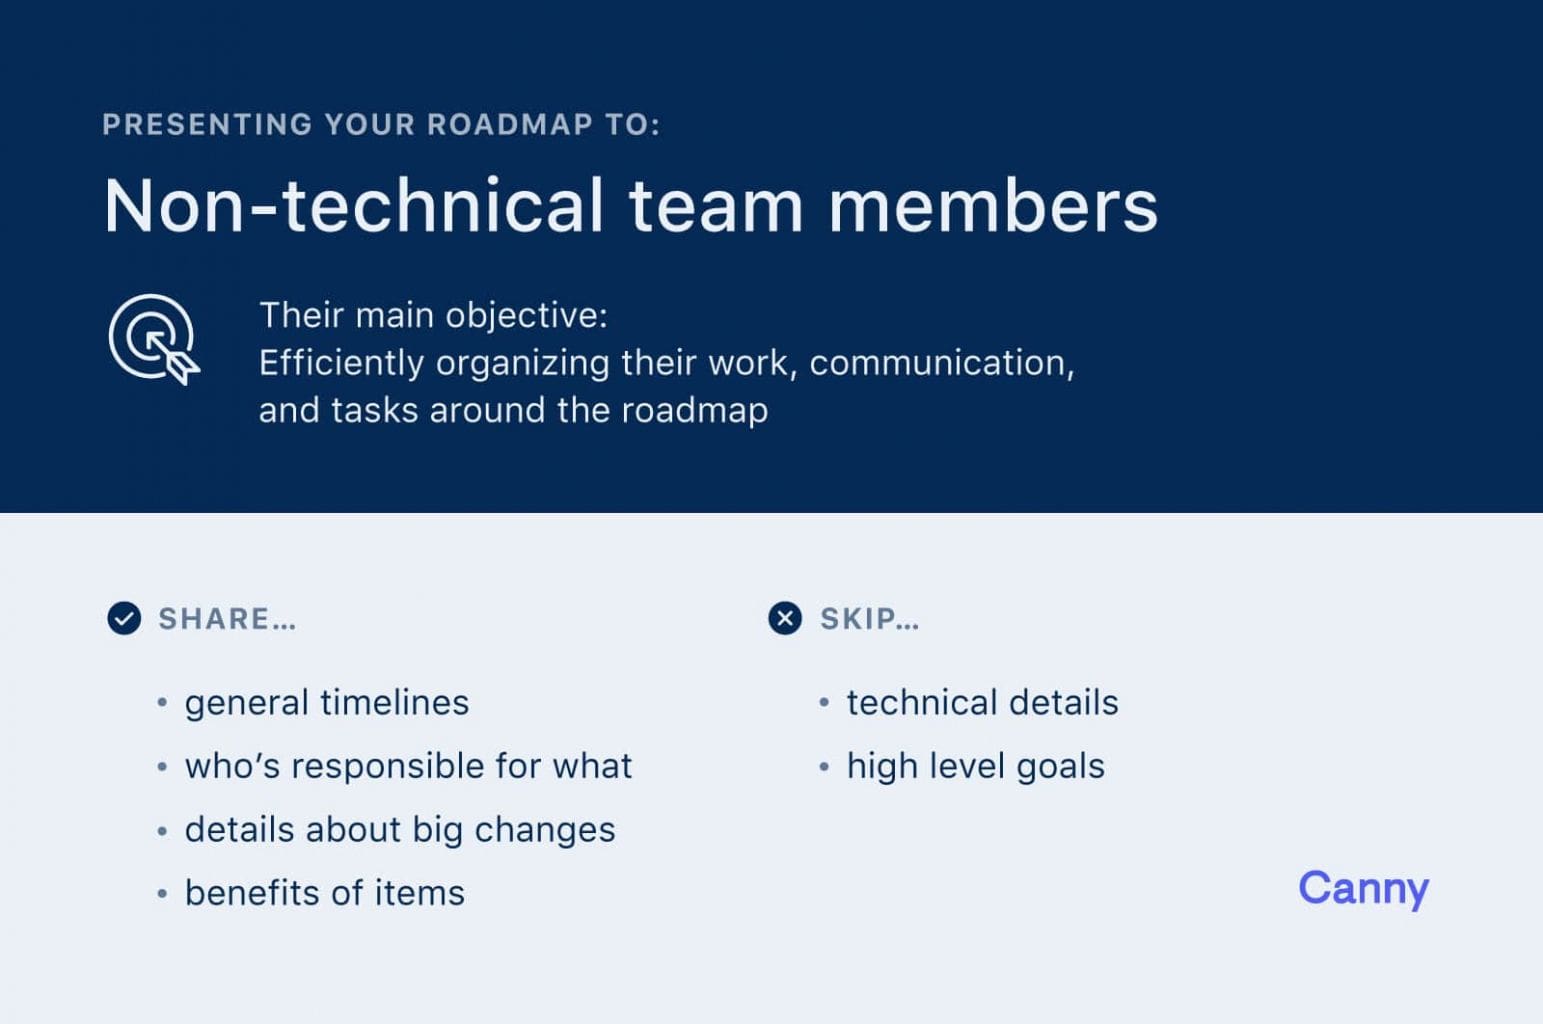 Make sure to include non-technical team members in your product roadmap presentations